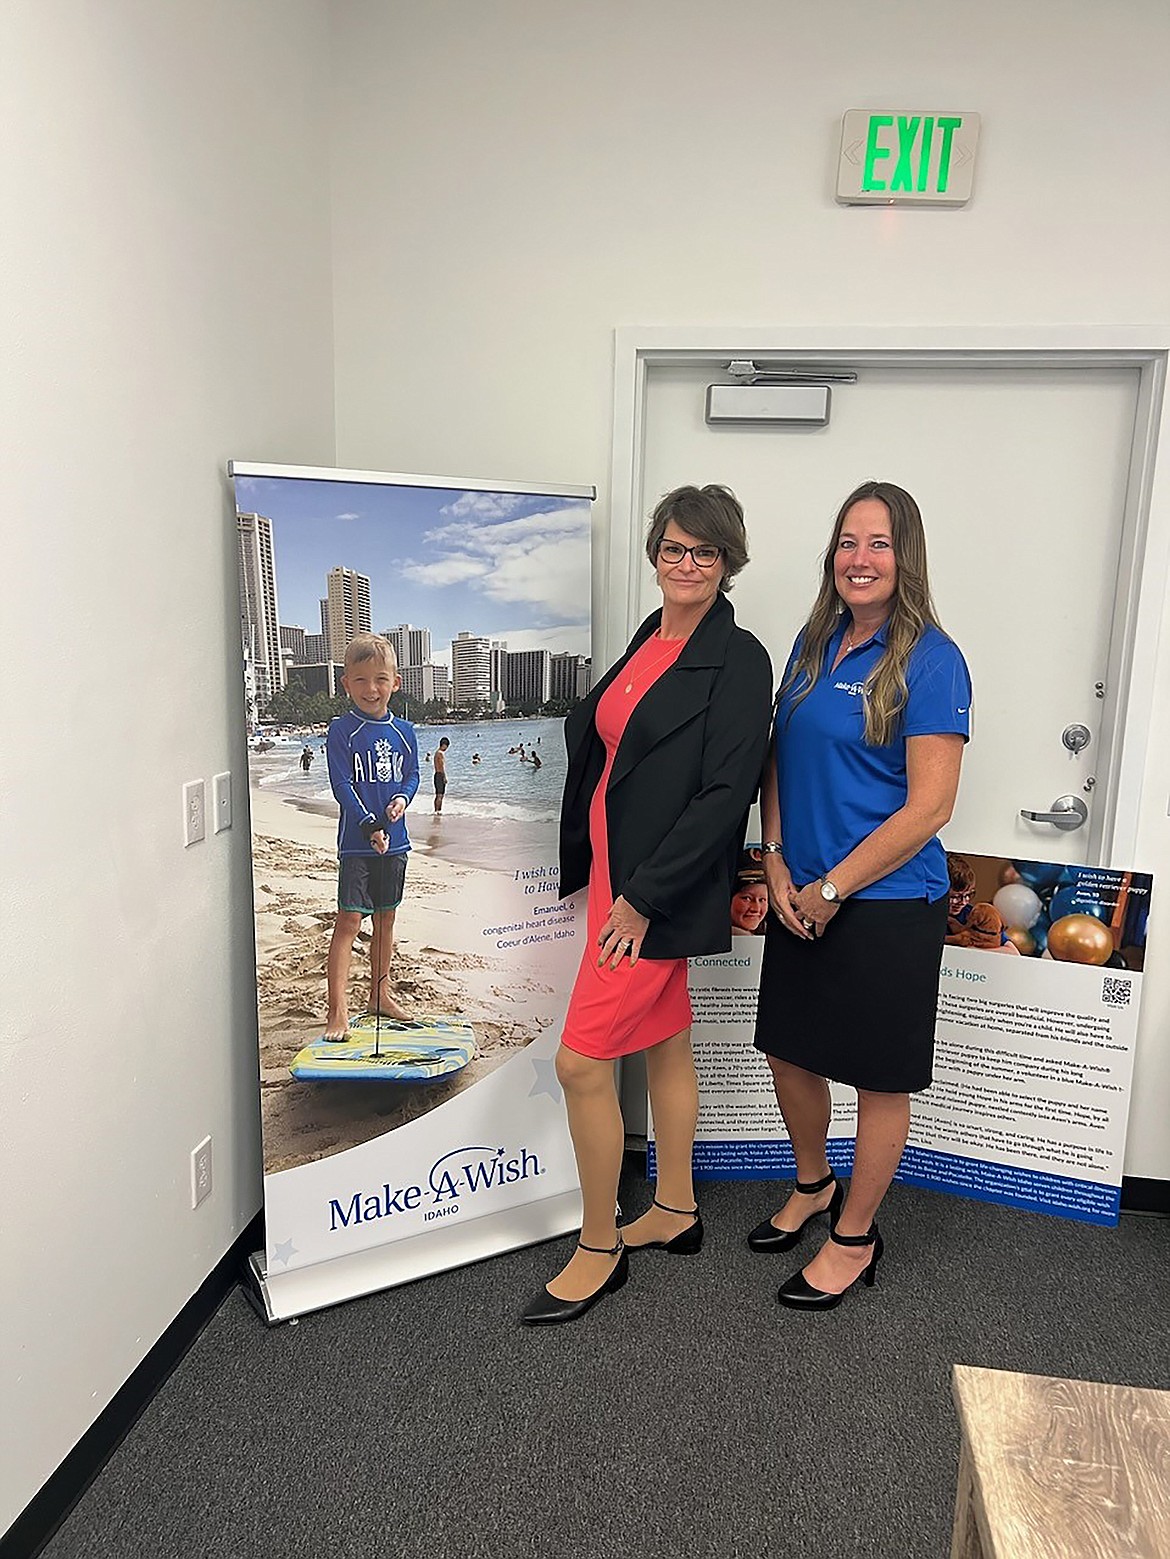 From left: Janie Best, president, and Michelle John, regional manager, of Make-A-Wish Idaho.